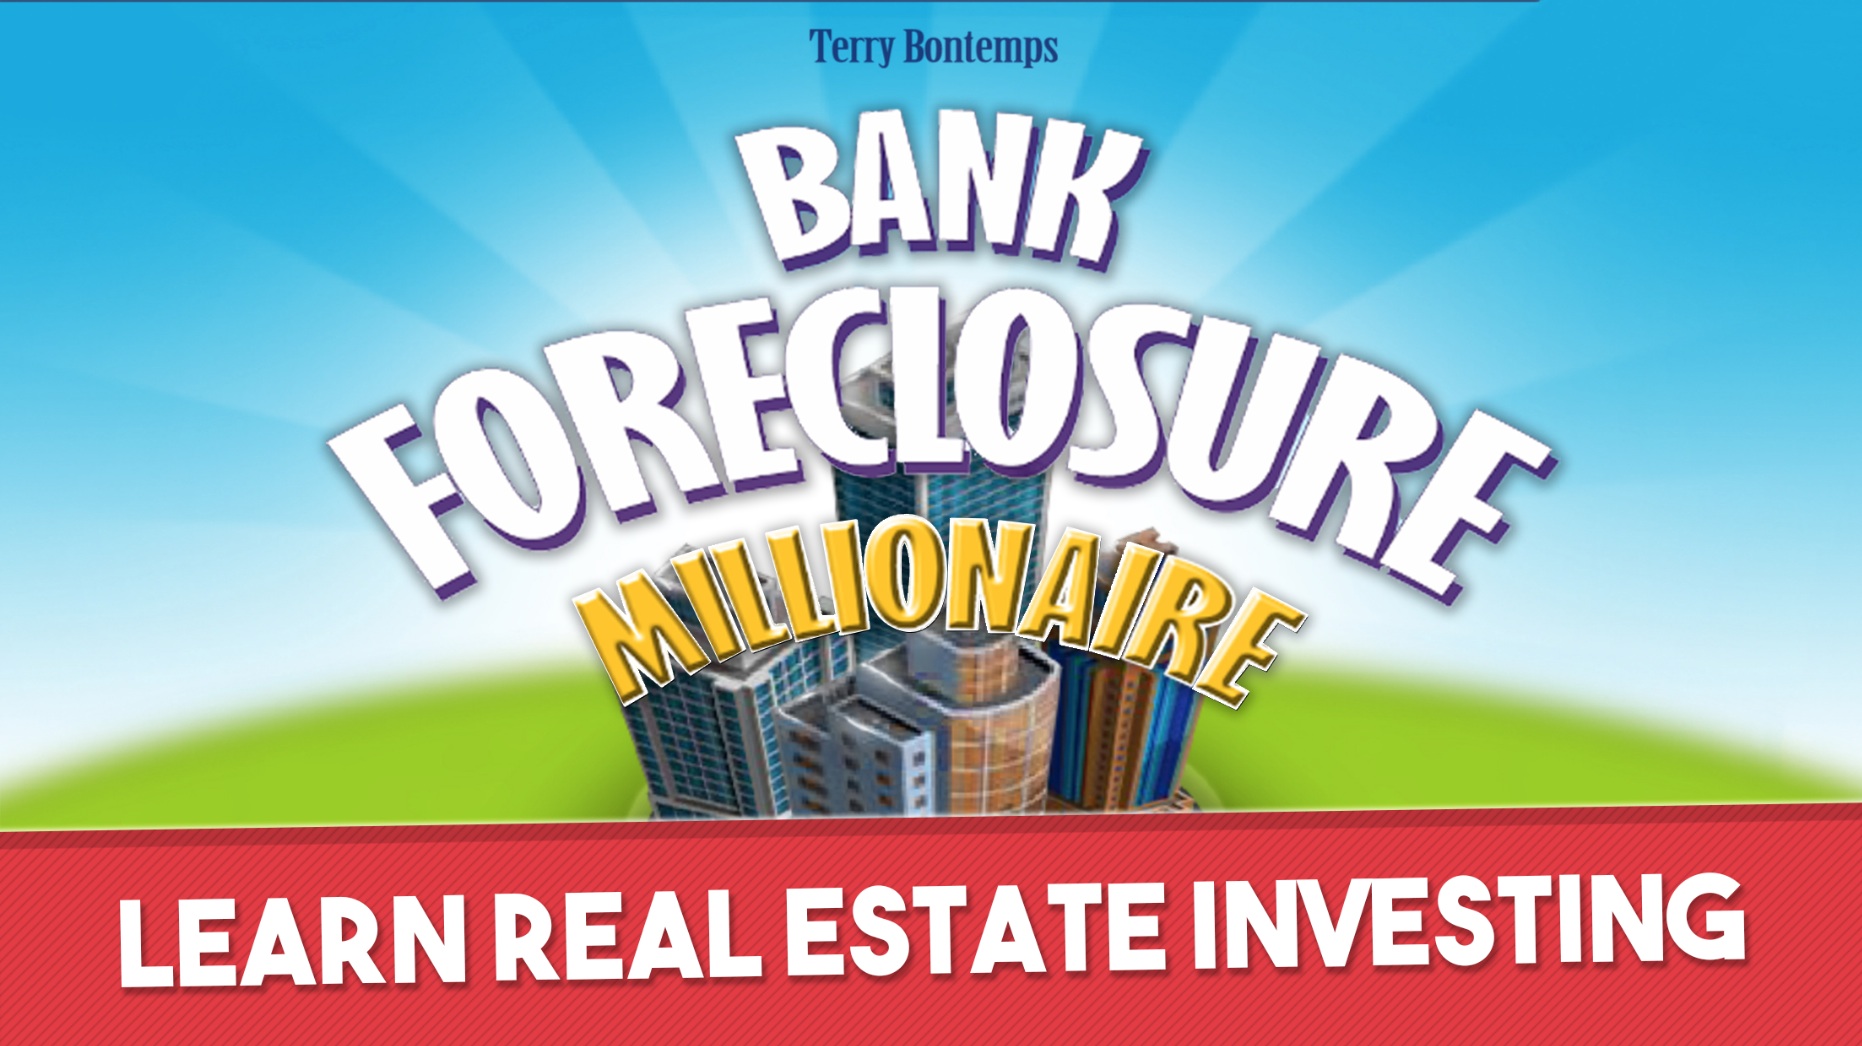 Bank Foreclosure Millionaire is the most enjoyable possible way to learn about real estate